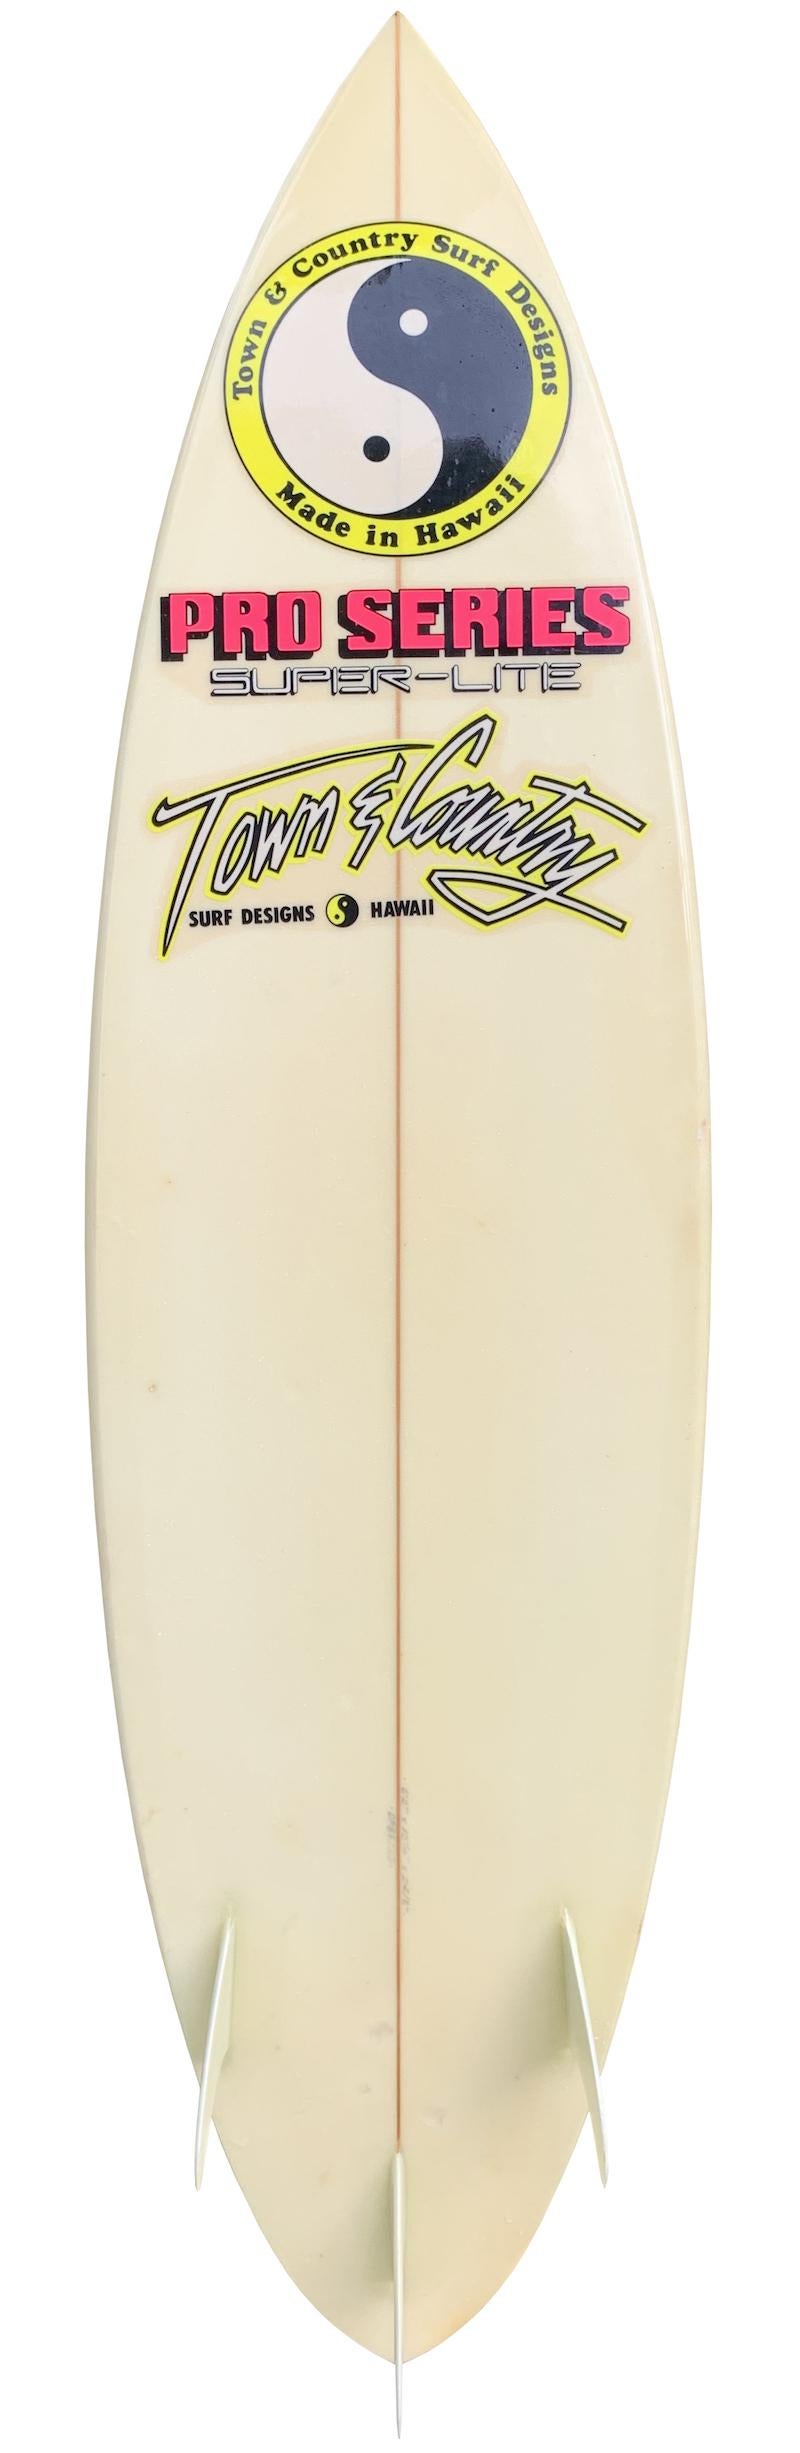 1988 Town & Country thruster (tri-fin) shortboard surfboard shaped by Dennis Pang. Features a vintage 1980s airbrush design with glassed on fins. A remarkable example of a late 1980s vintage T&C surfboard made in Hawaii. This vintage surfboard